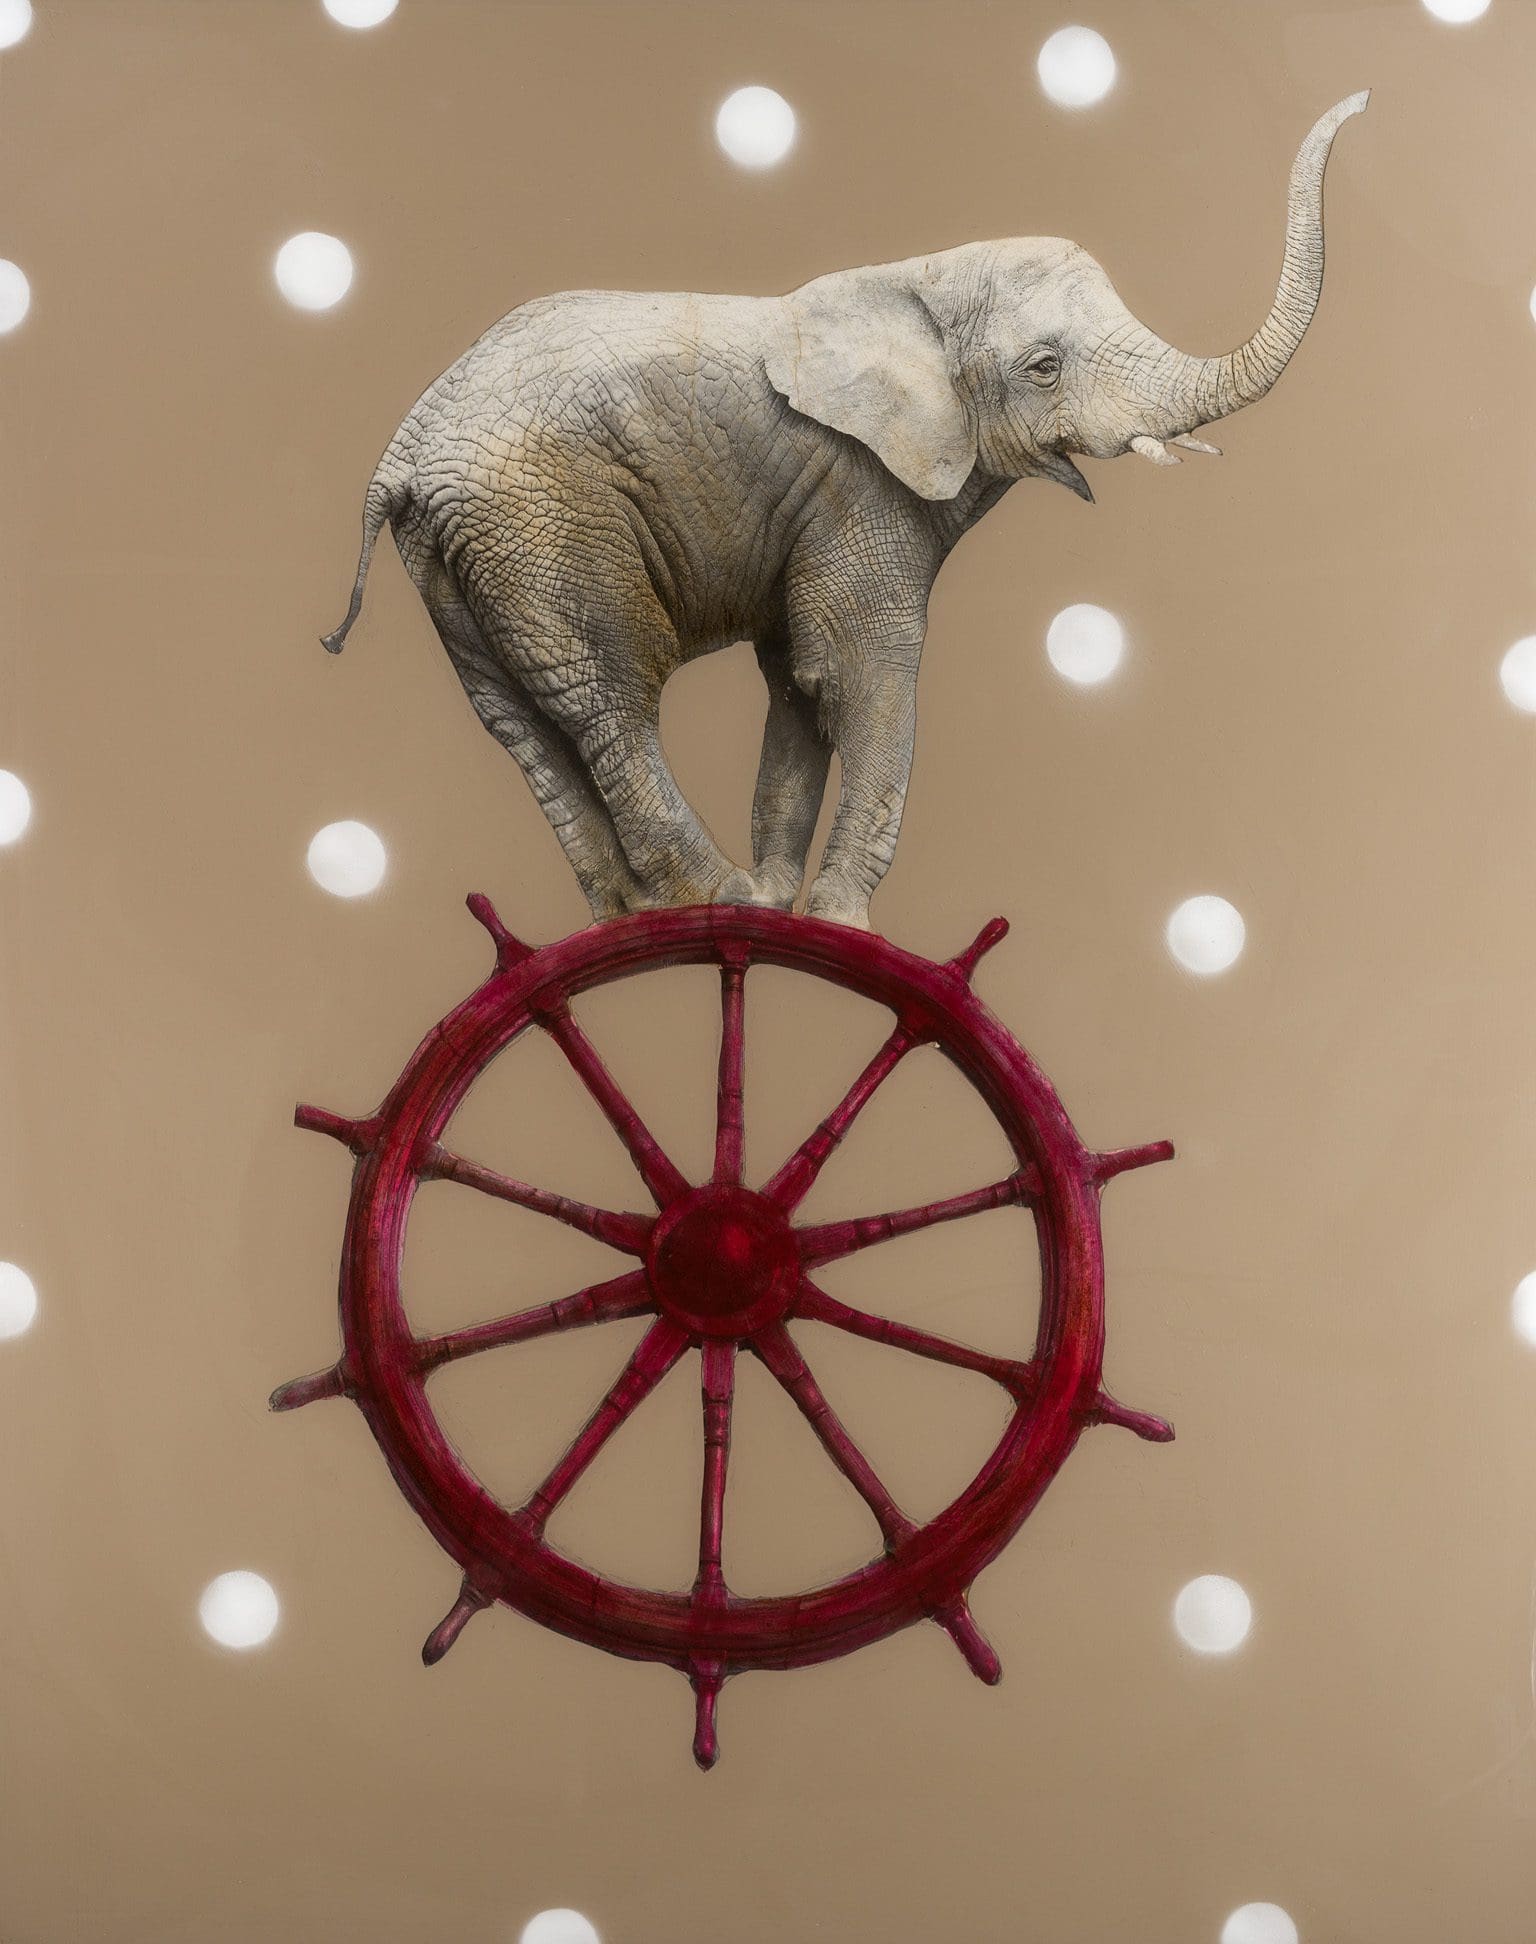 Anke, Red Shipwheel, Mixed Media on Wood, 60 × 48 inches